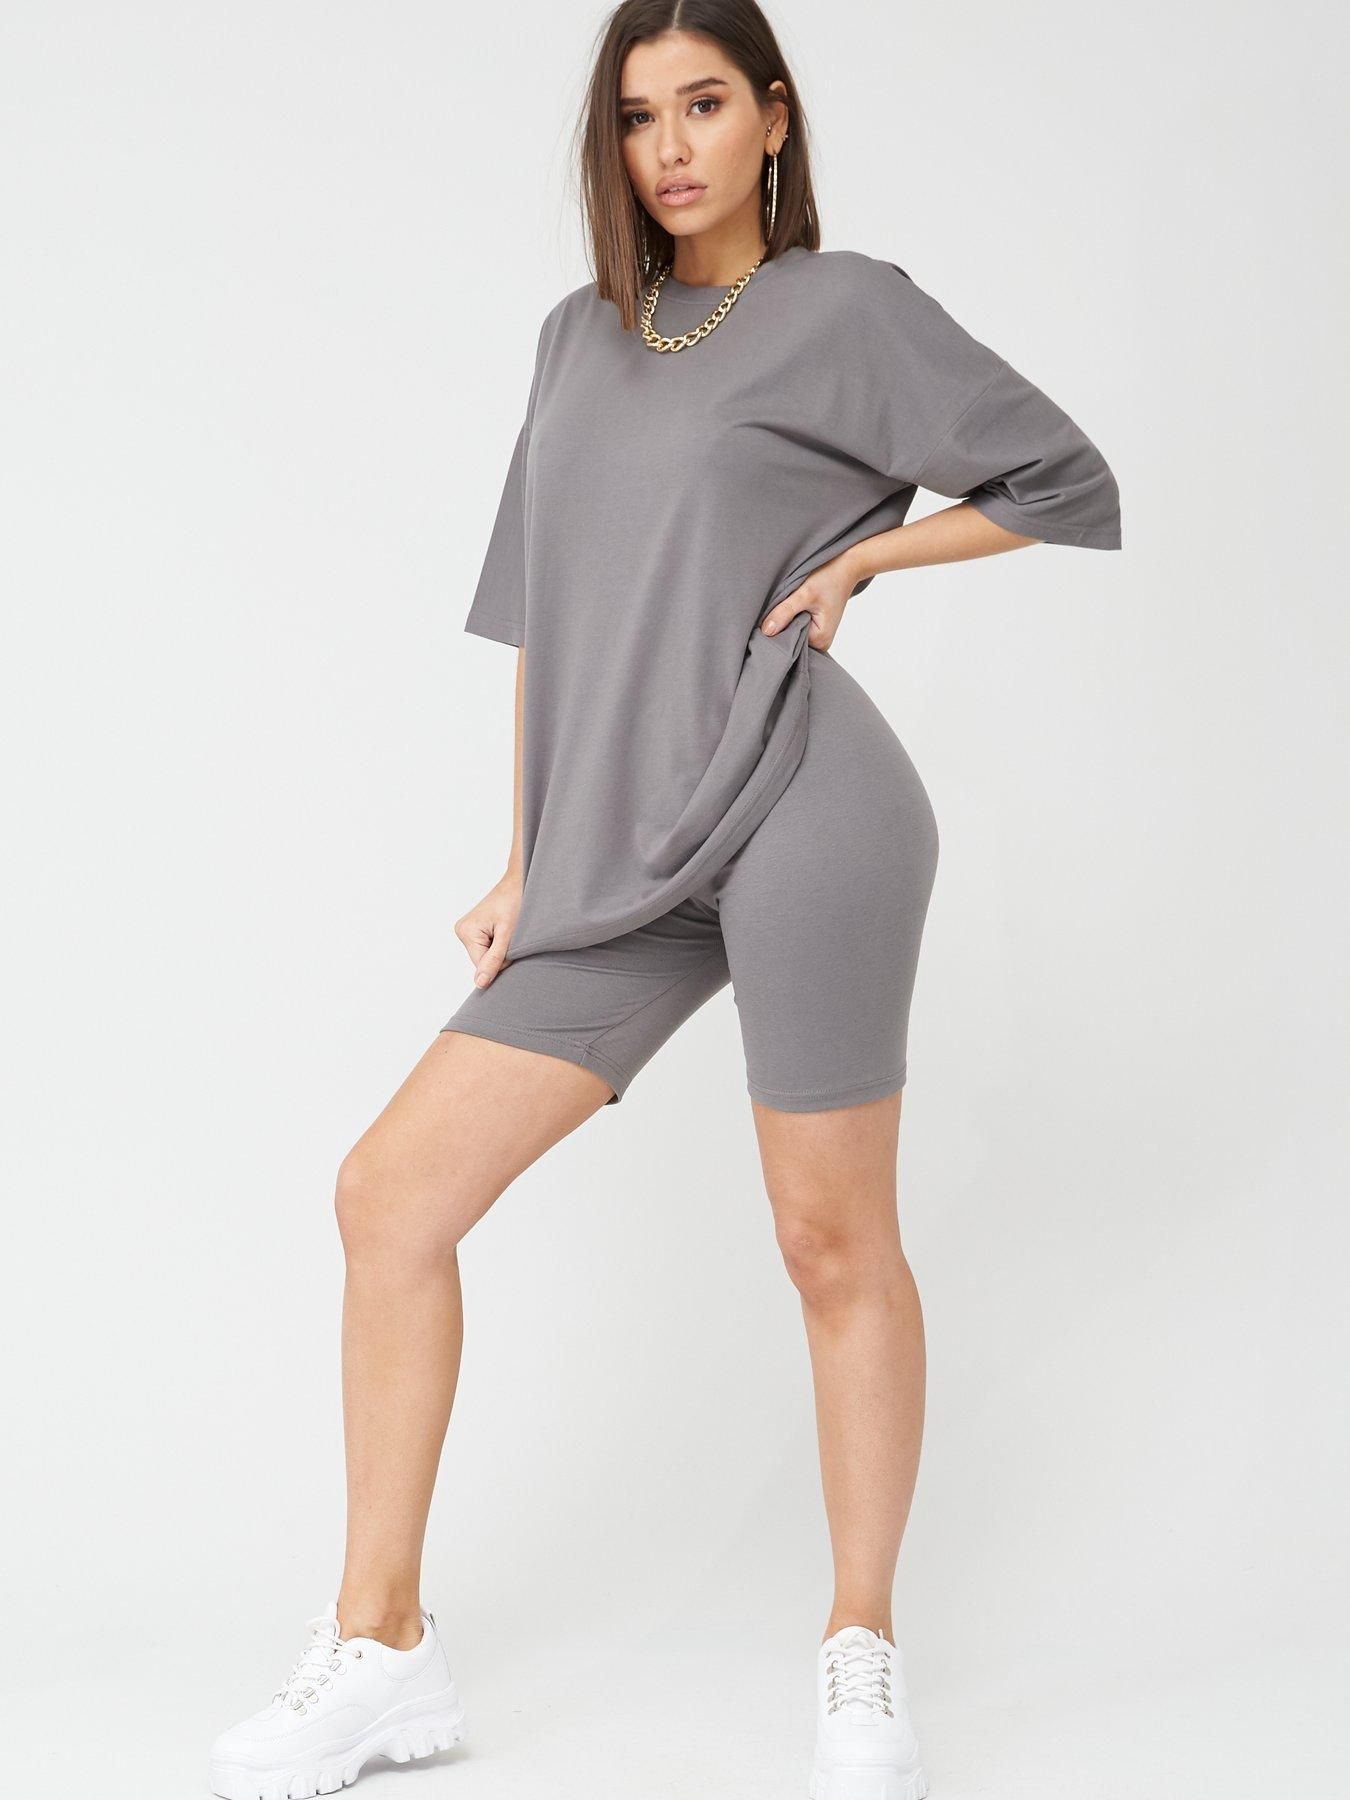 Casual oversized t-shirt and shorts.